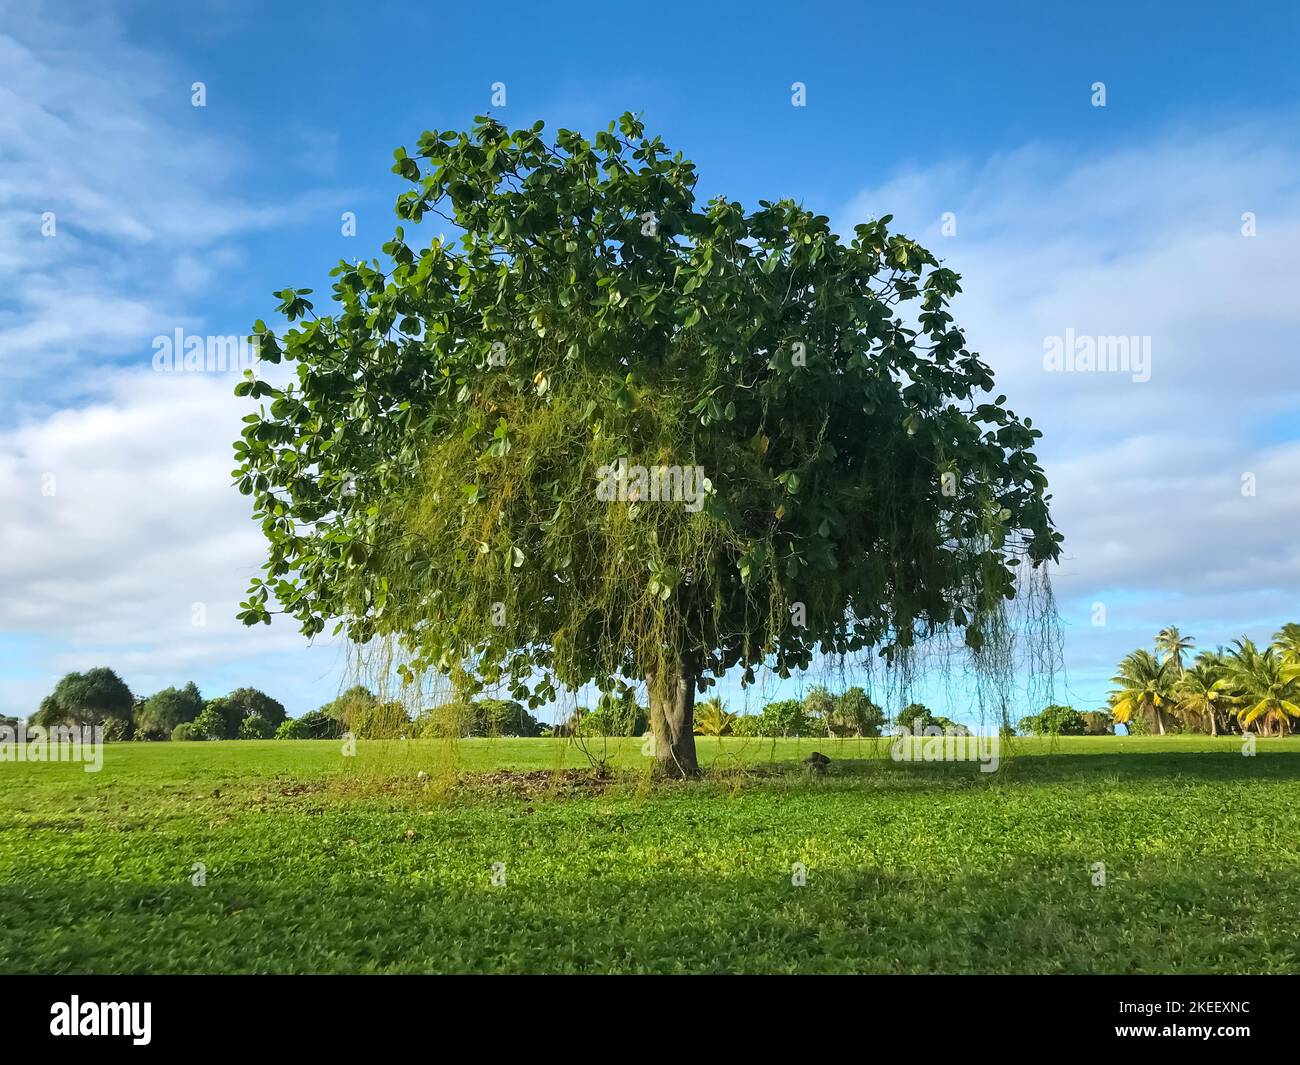 Lonley tree on green meadow against blue sky background. Wonderful nature landscape. Stock Photo